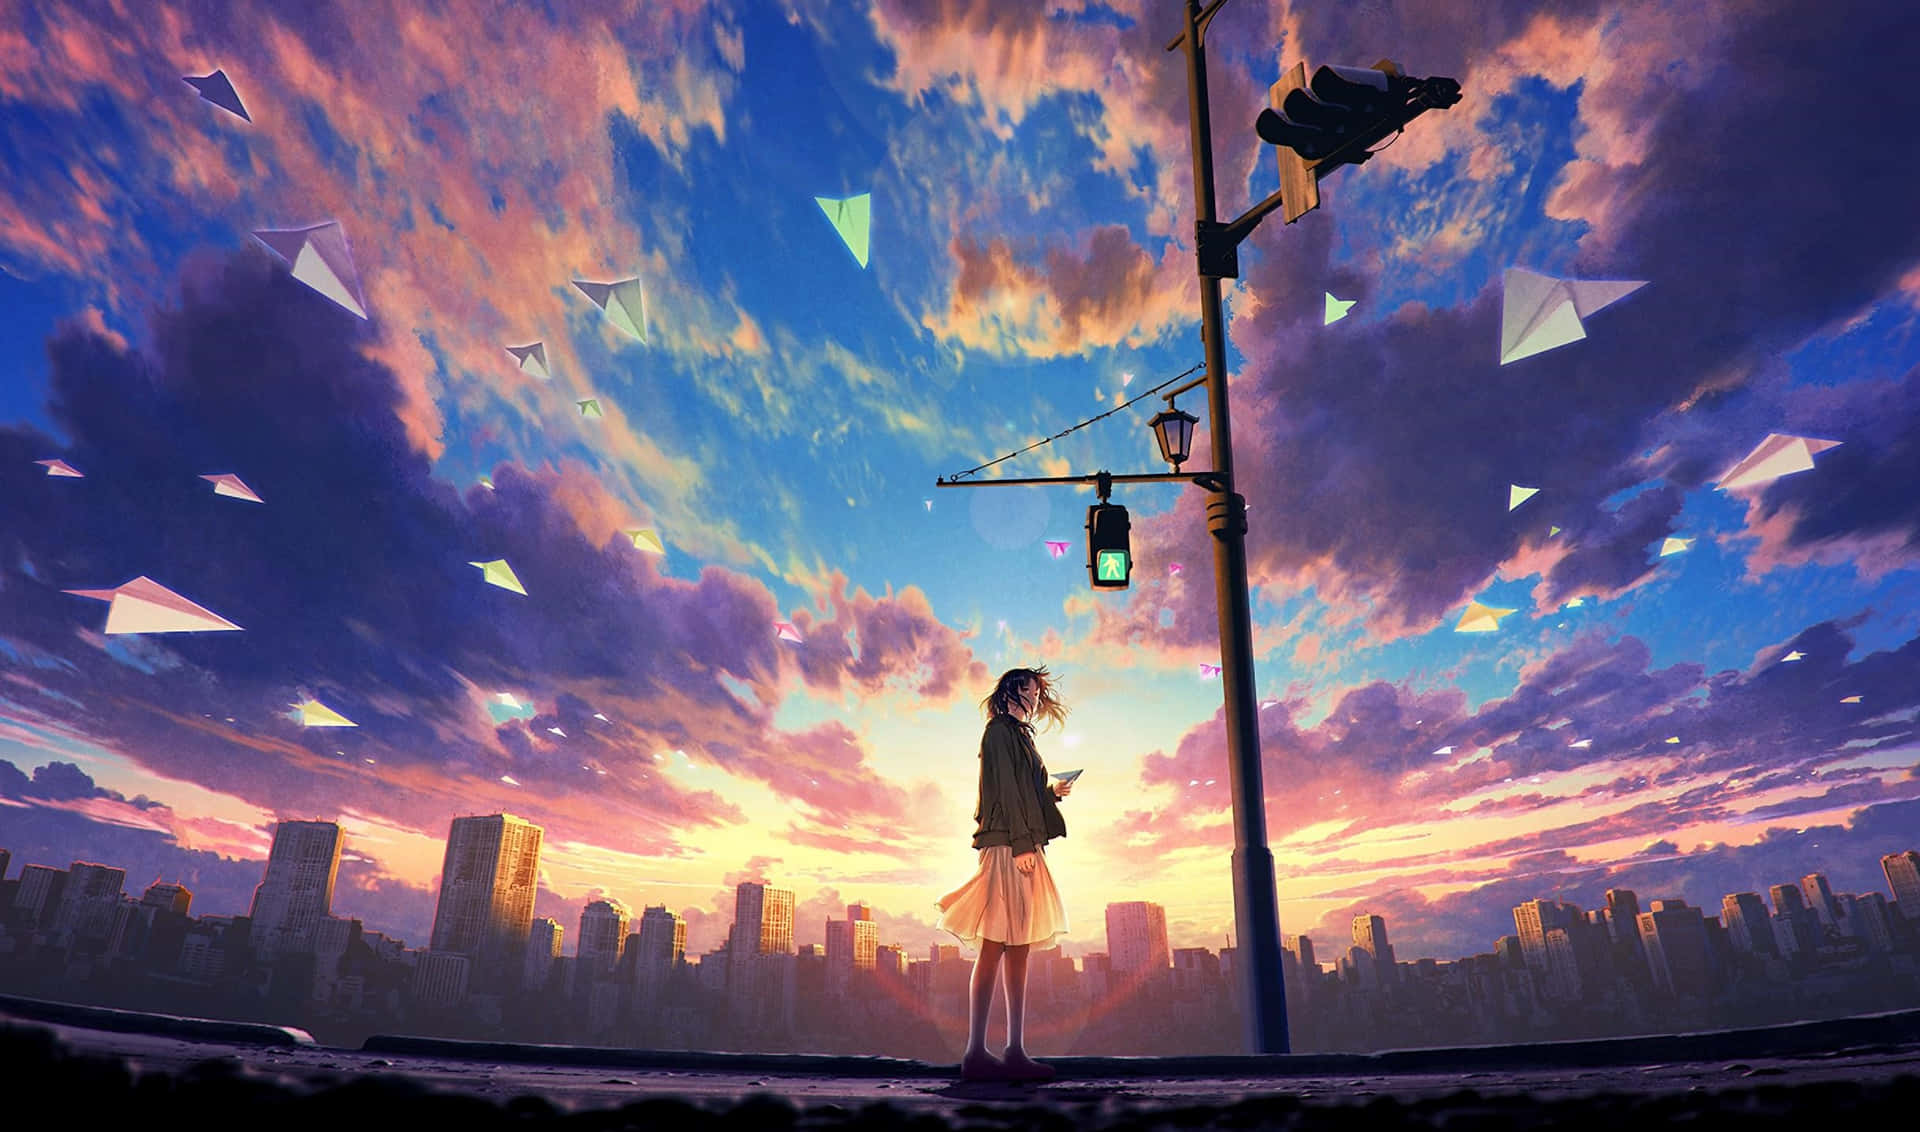 Adventure Awaits in this Cute Anime Scenery Wallpaper